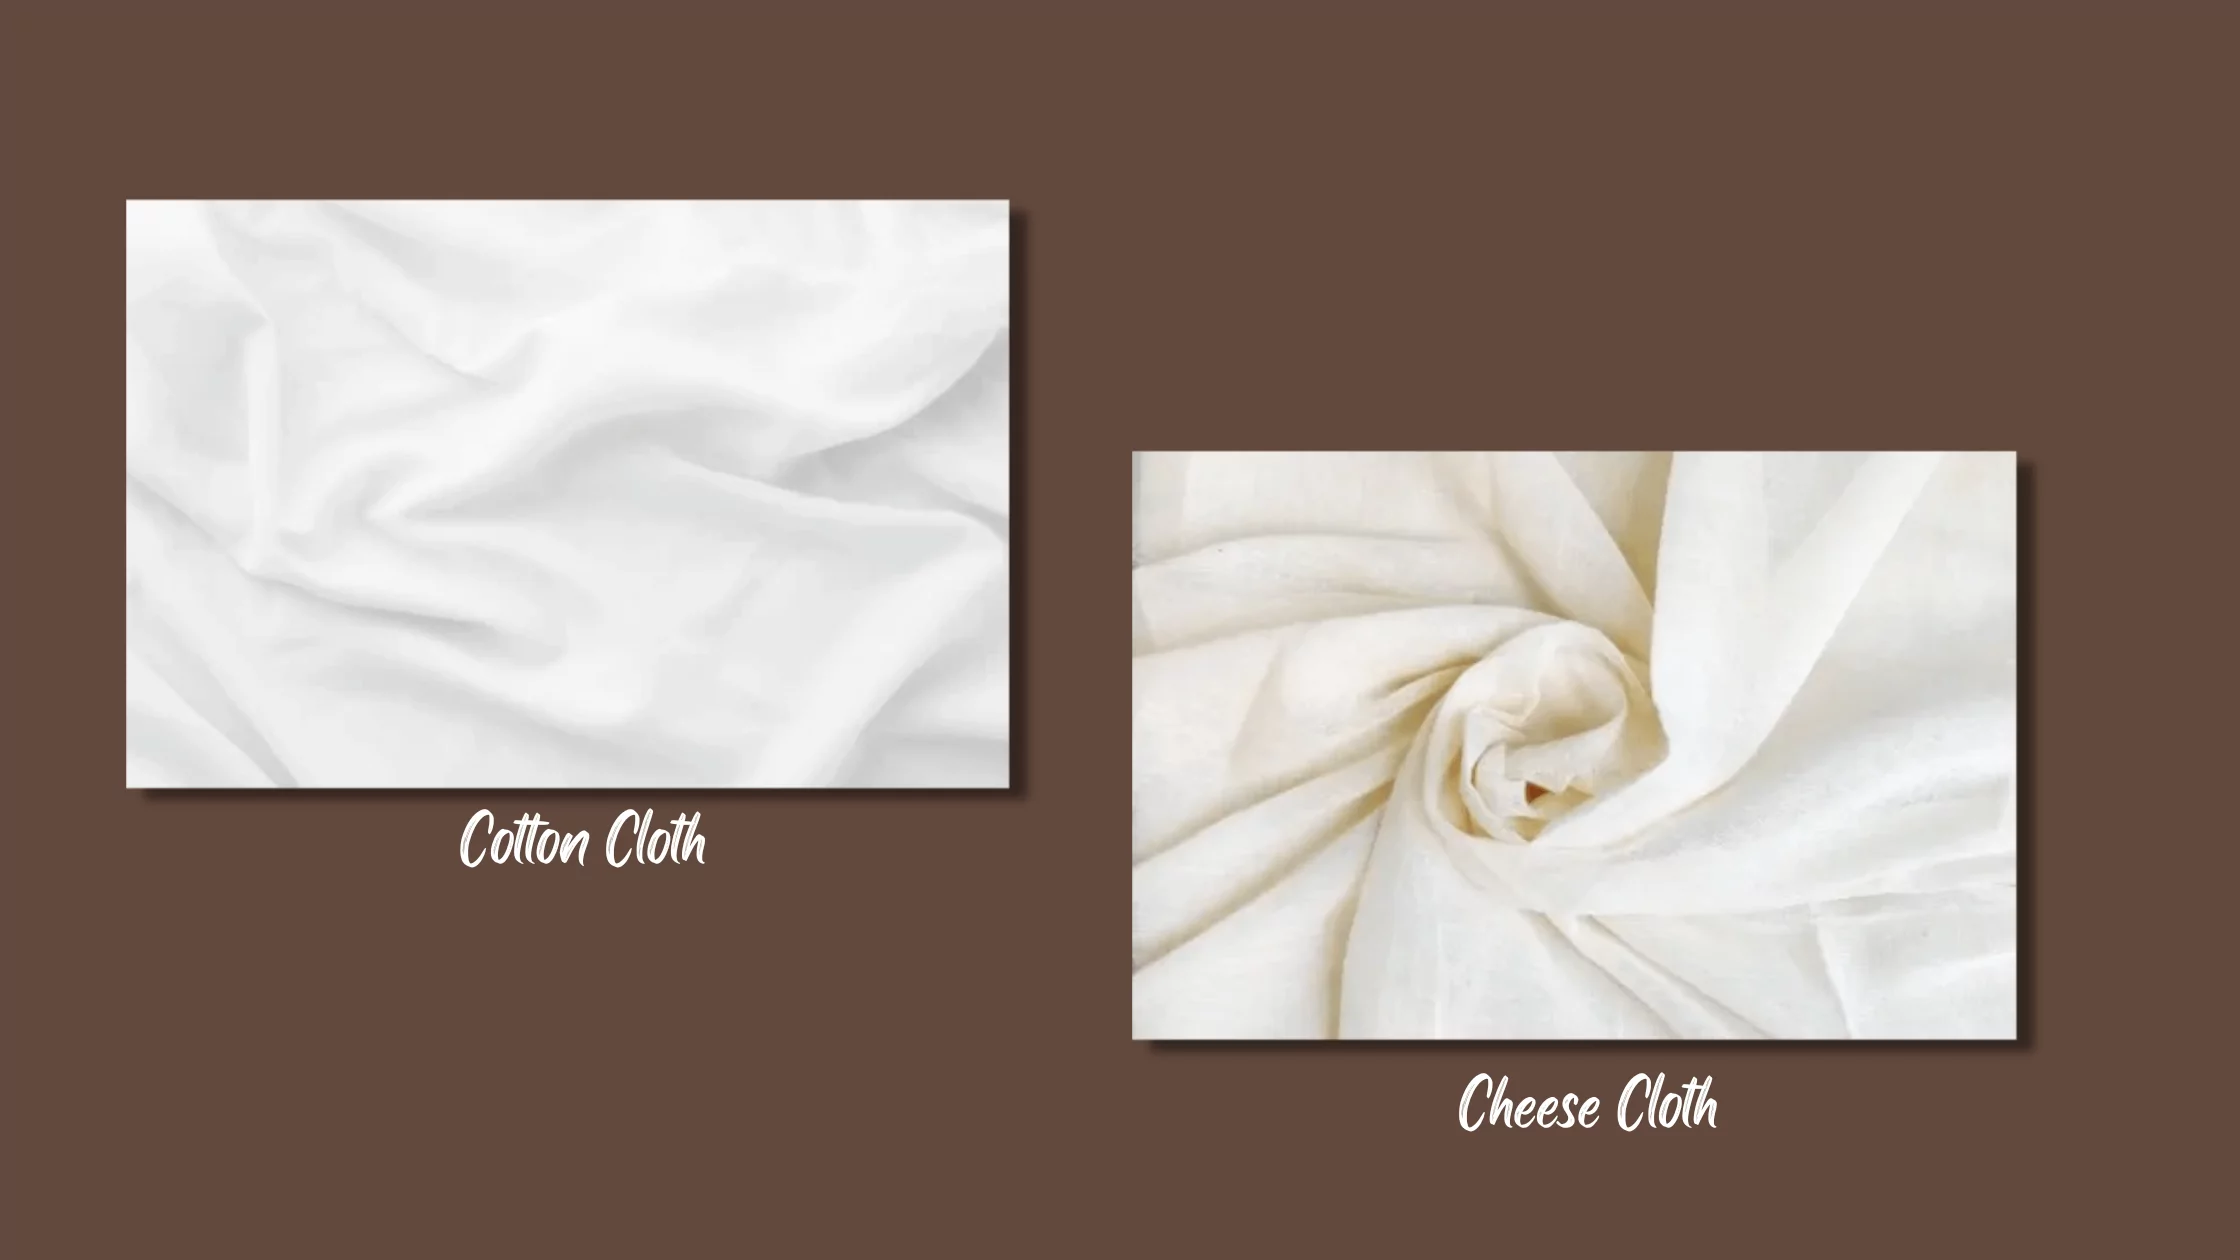 Cheesecloth And Cotton Cloth